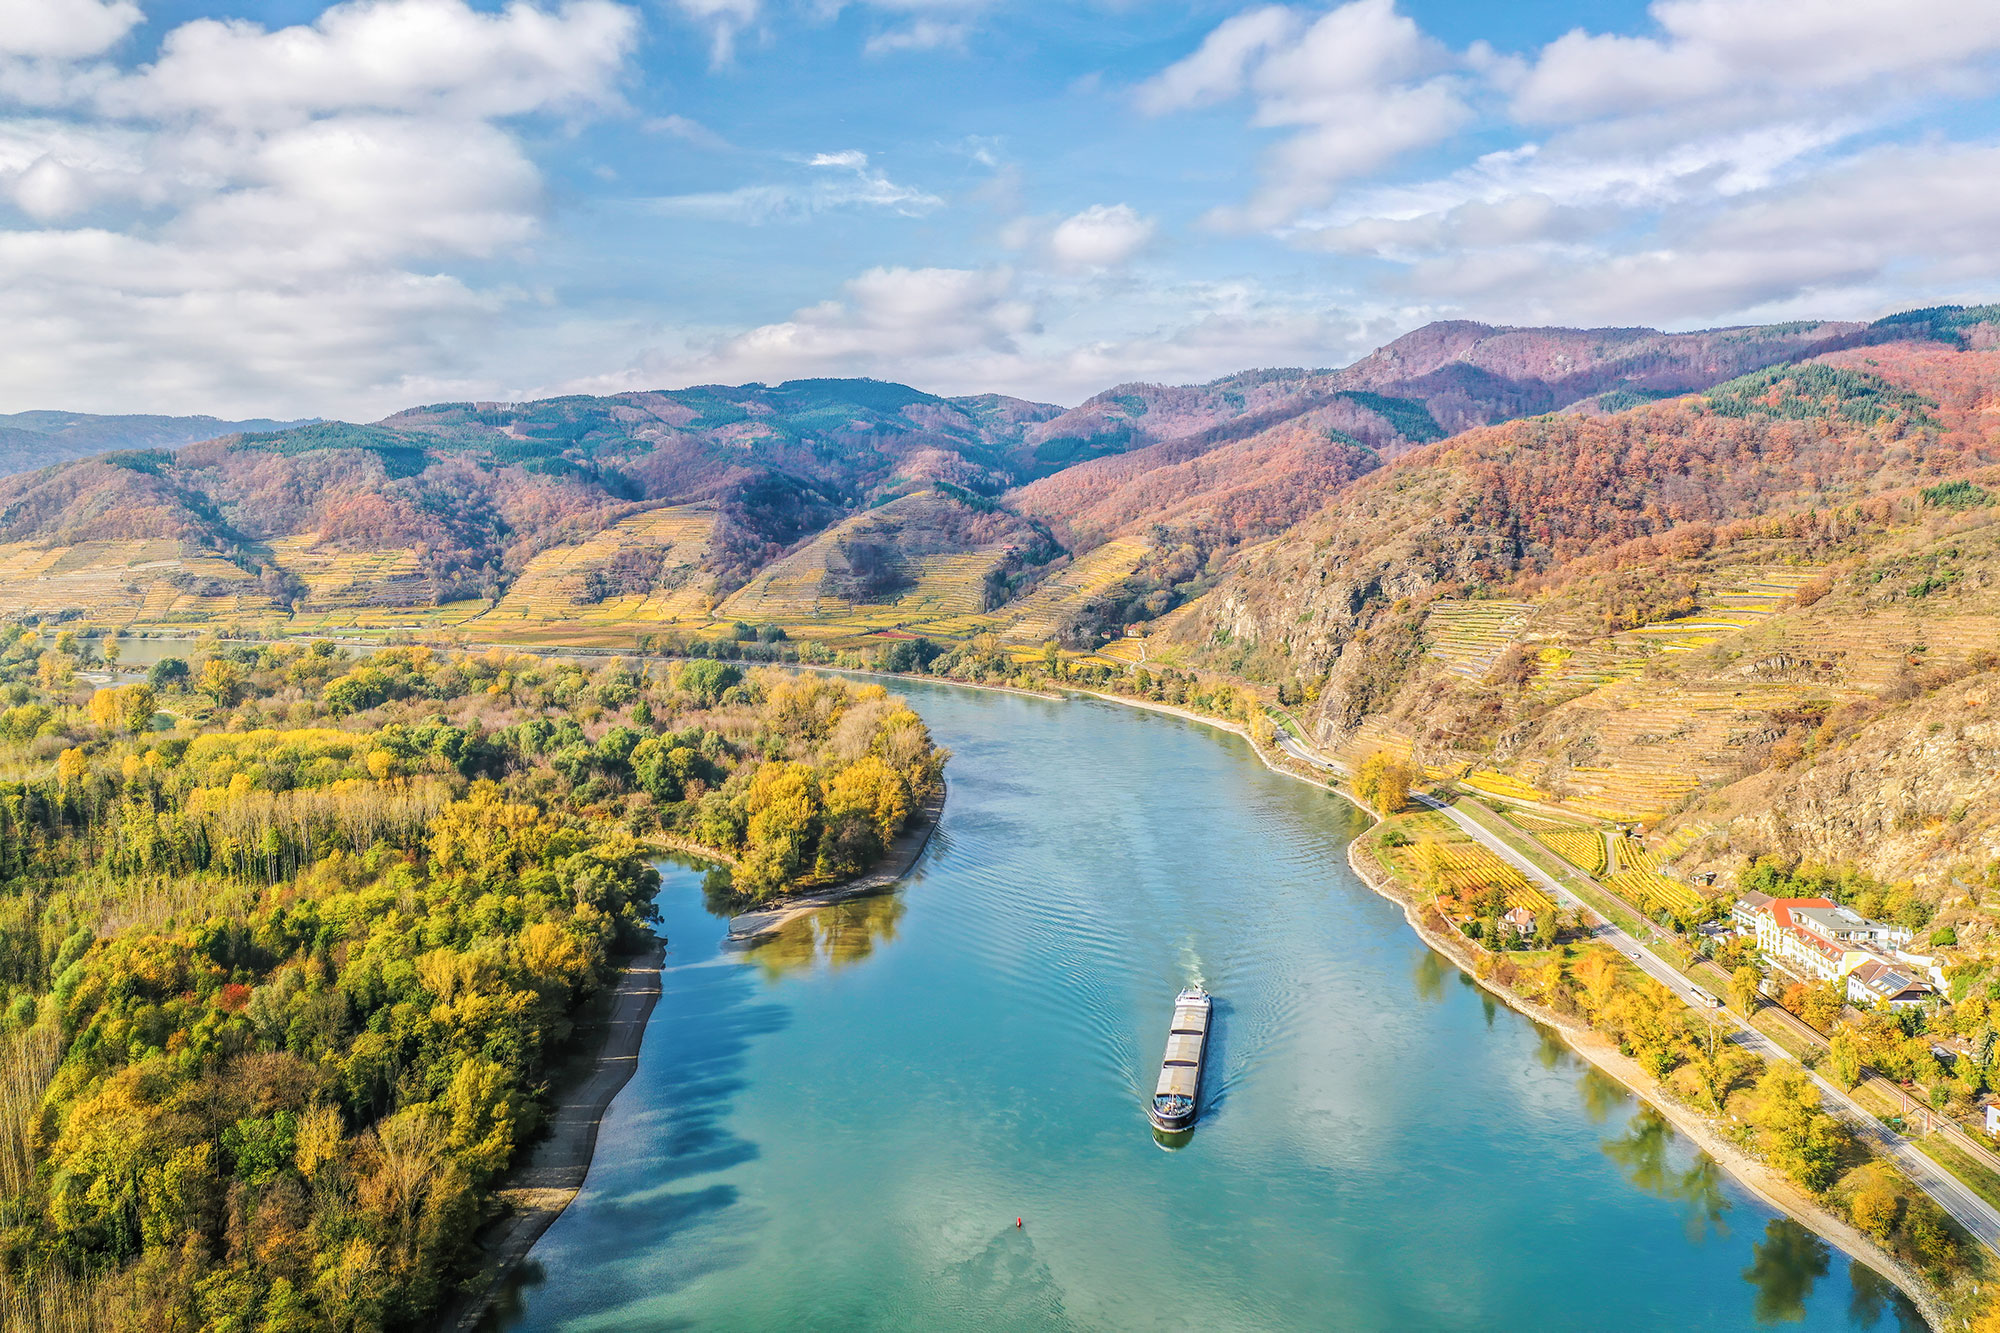 The Danube is Europe’s Mississippi - linking the continent with the Black Sea, it serves as one of the most important trade gateways, facilitating the region’s networks with the entire world. 